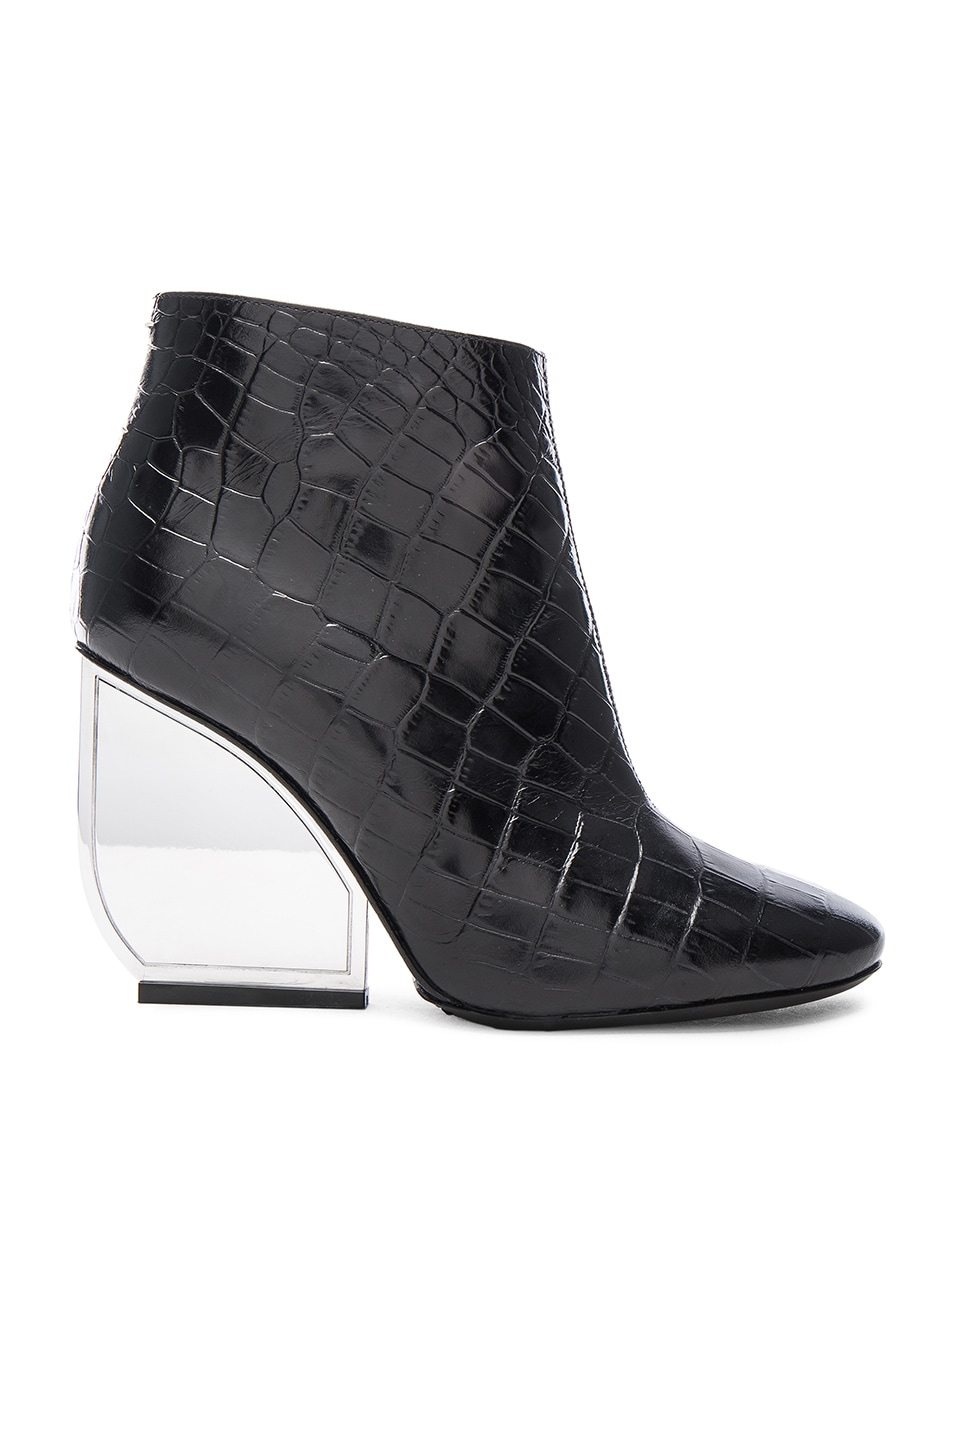 Image 1 of Maison Margiela Embossed Leather Booties in Black